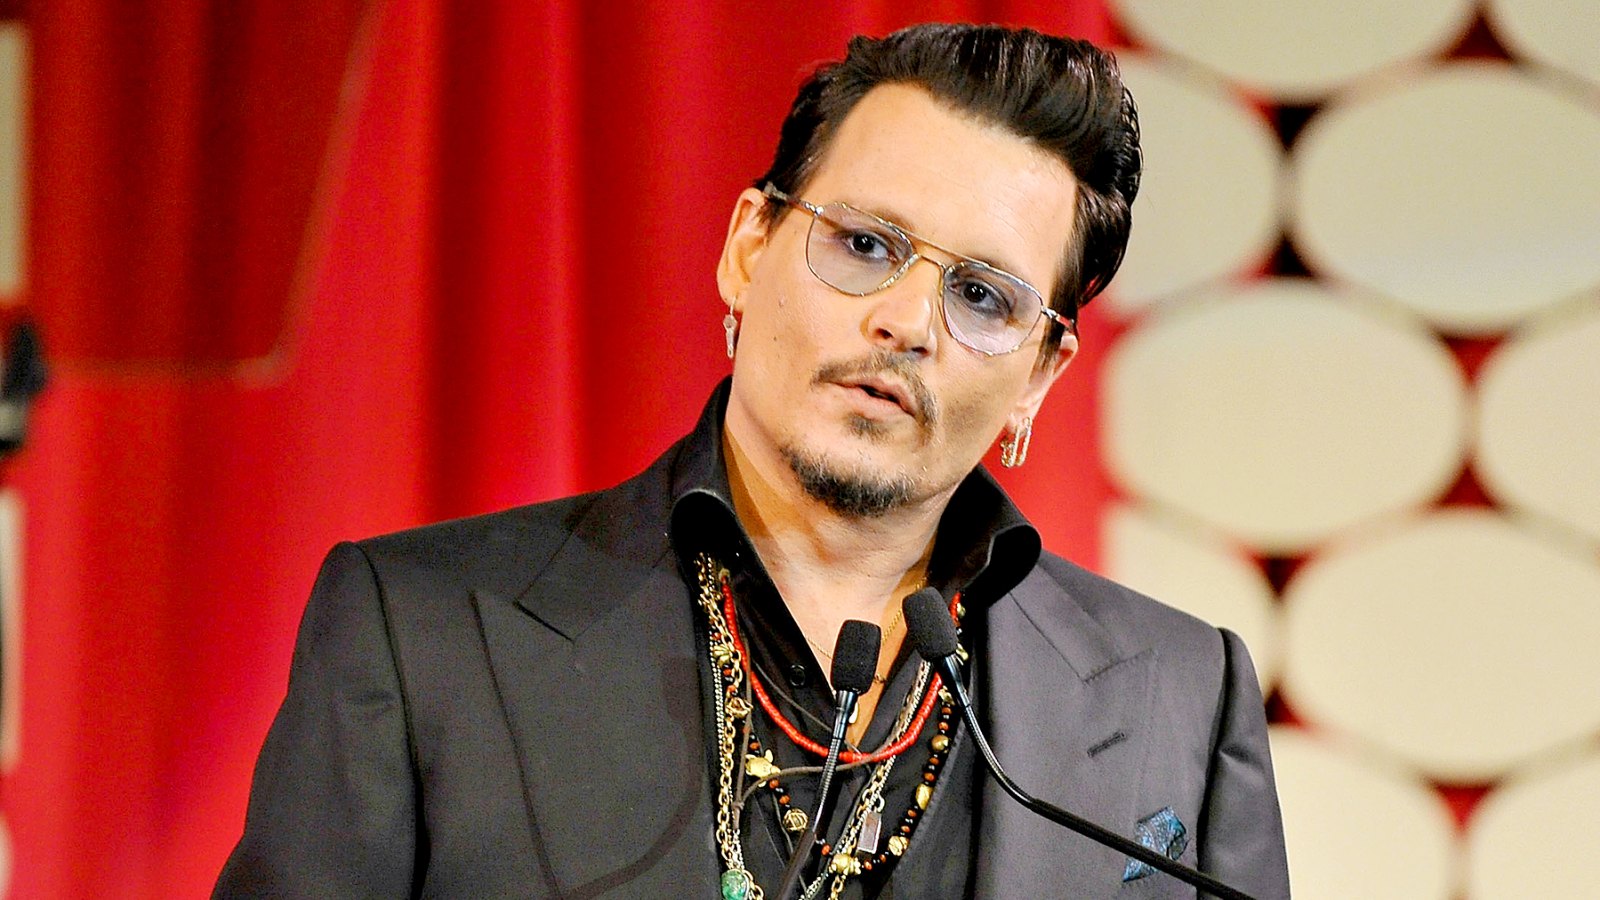 Johnny Depp on stage at the Make-Up Artists and Hair Stylists Guild Awards at Paramount Studios on February 20, 2016 in Hollywood, California.